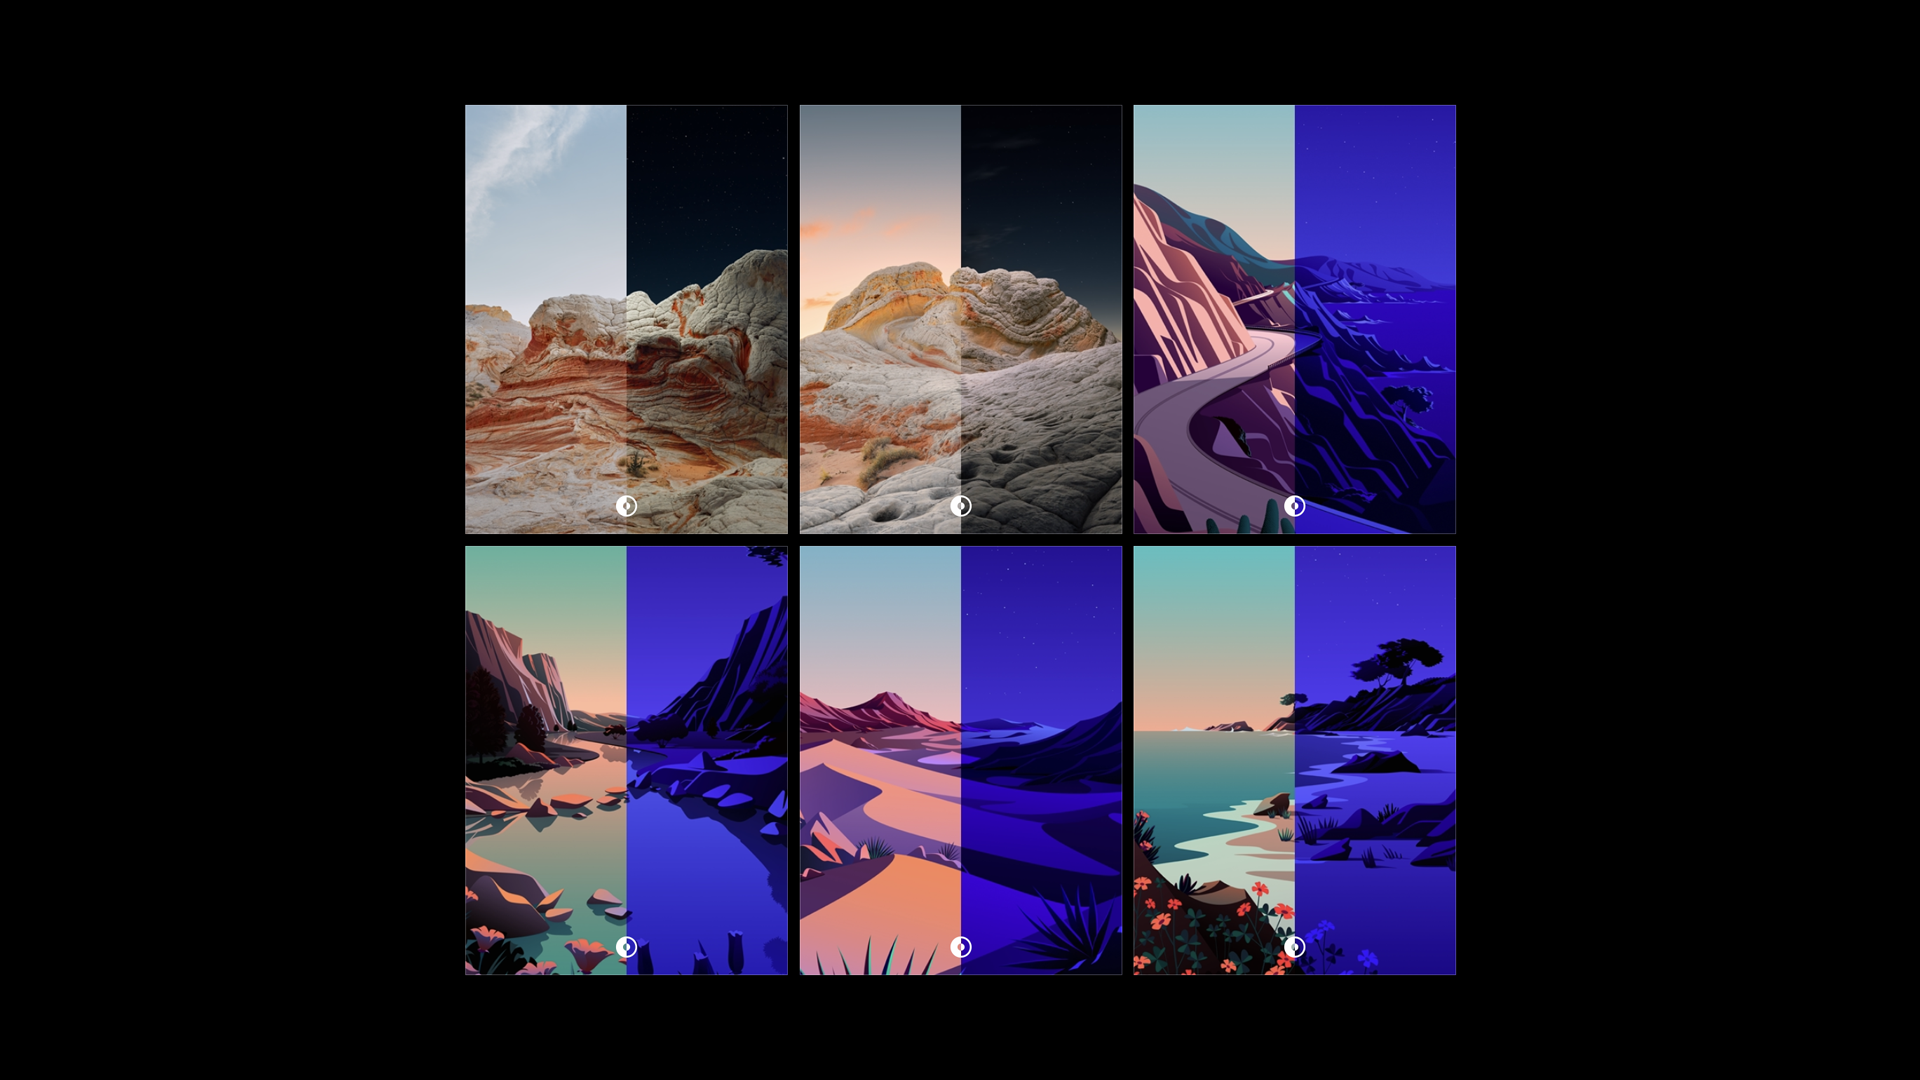 Download the new iOS 14.2 wallpaper for your devices right here